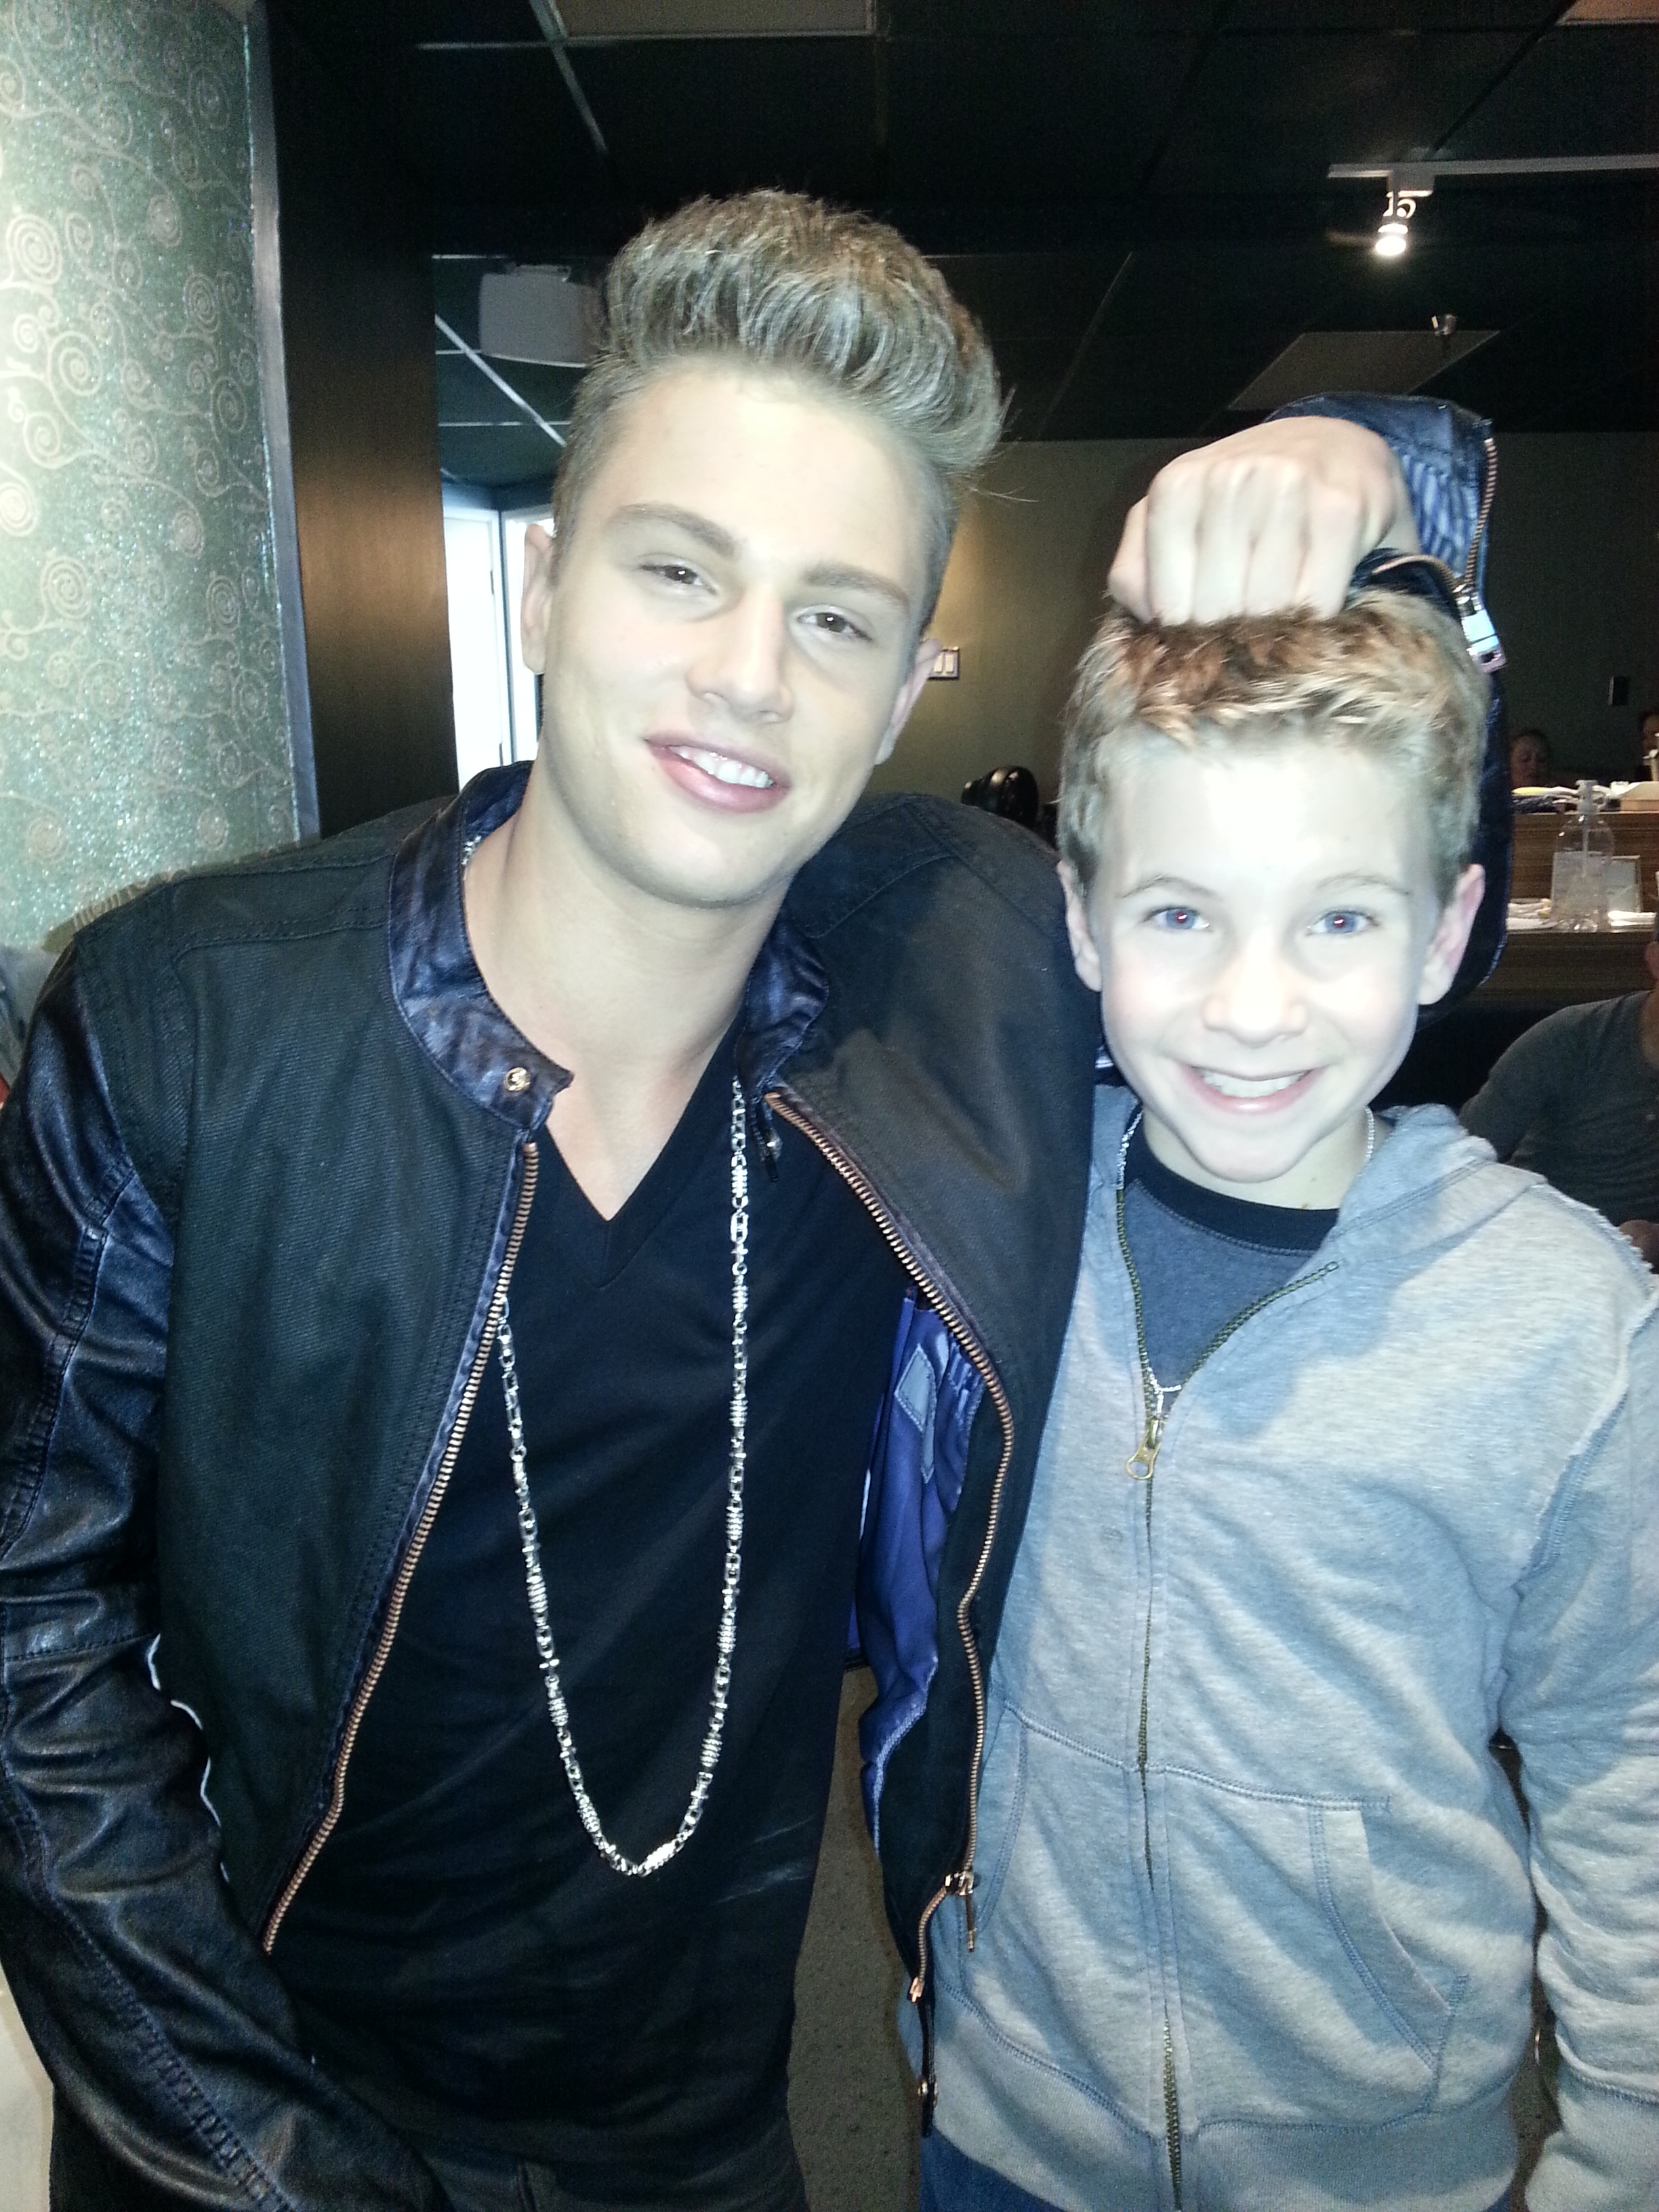 Justin Ellings with Austin Fryberger on a break from filming Sam and Cat.